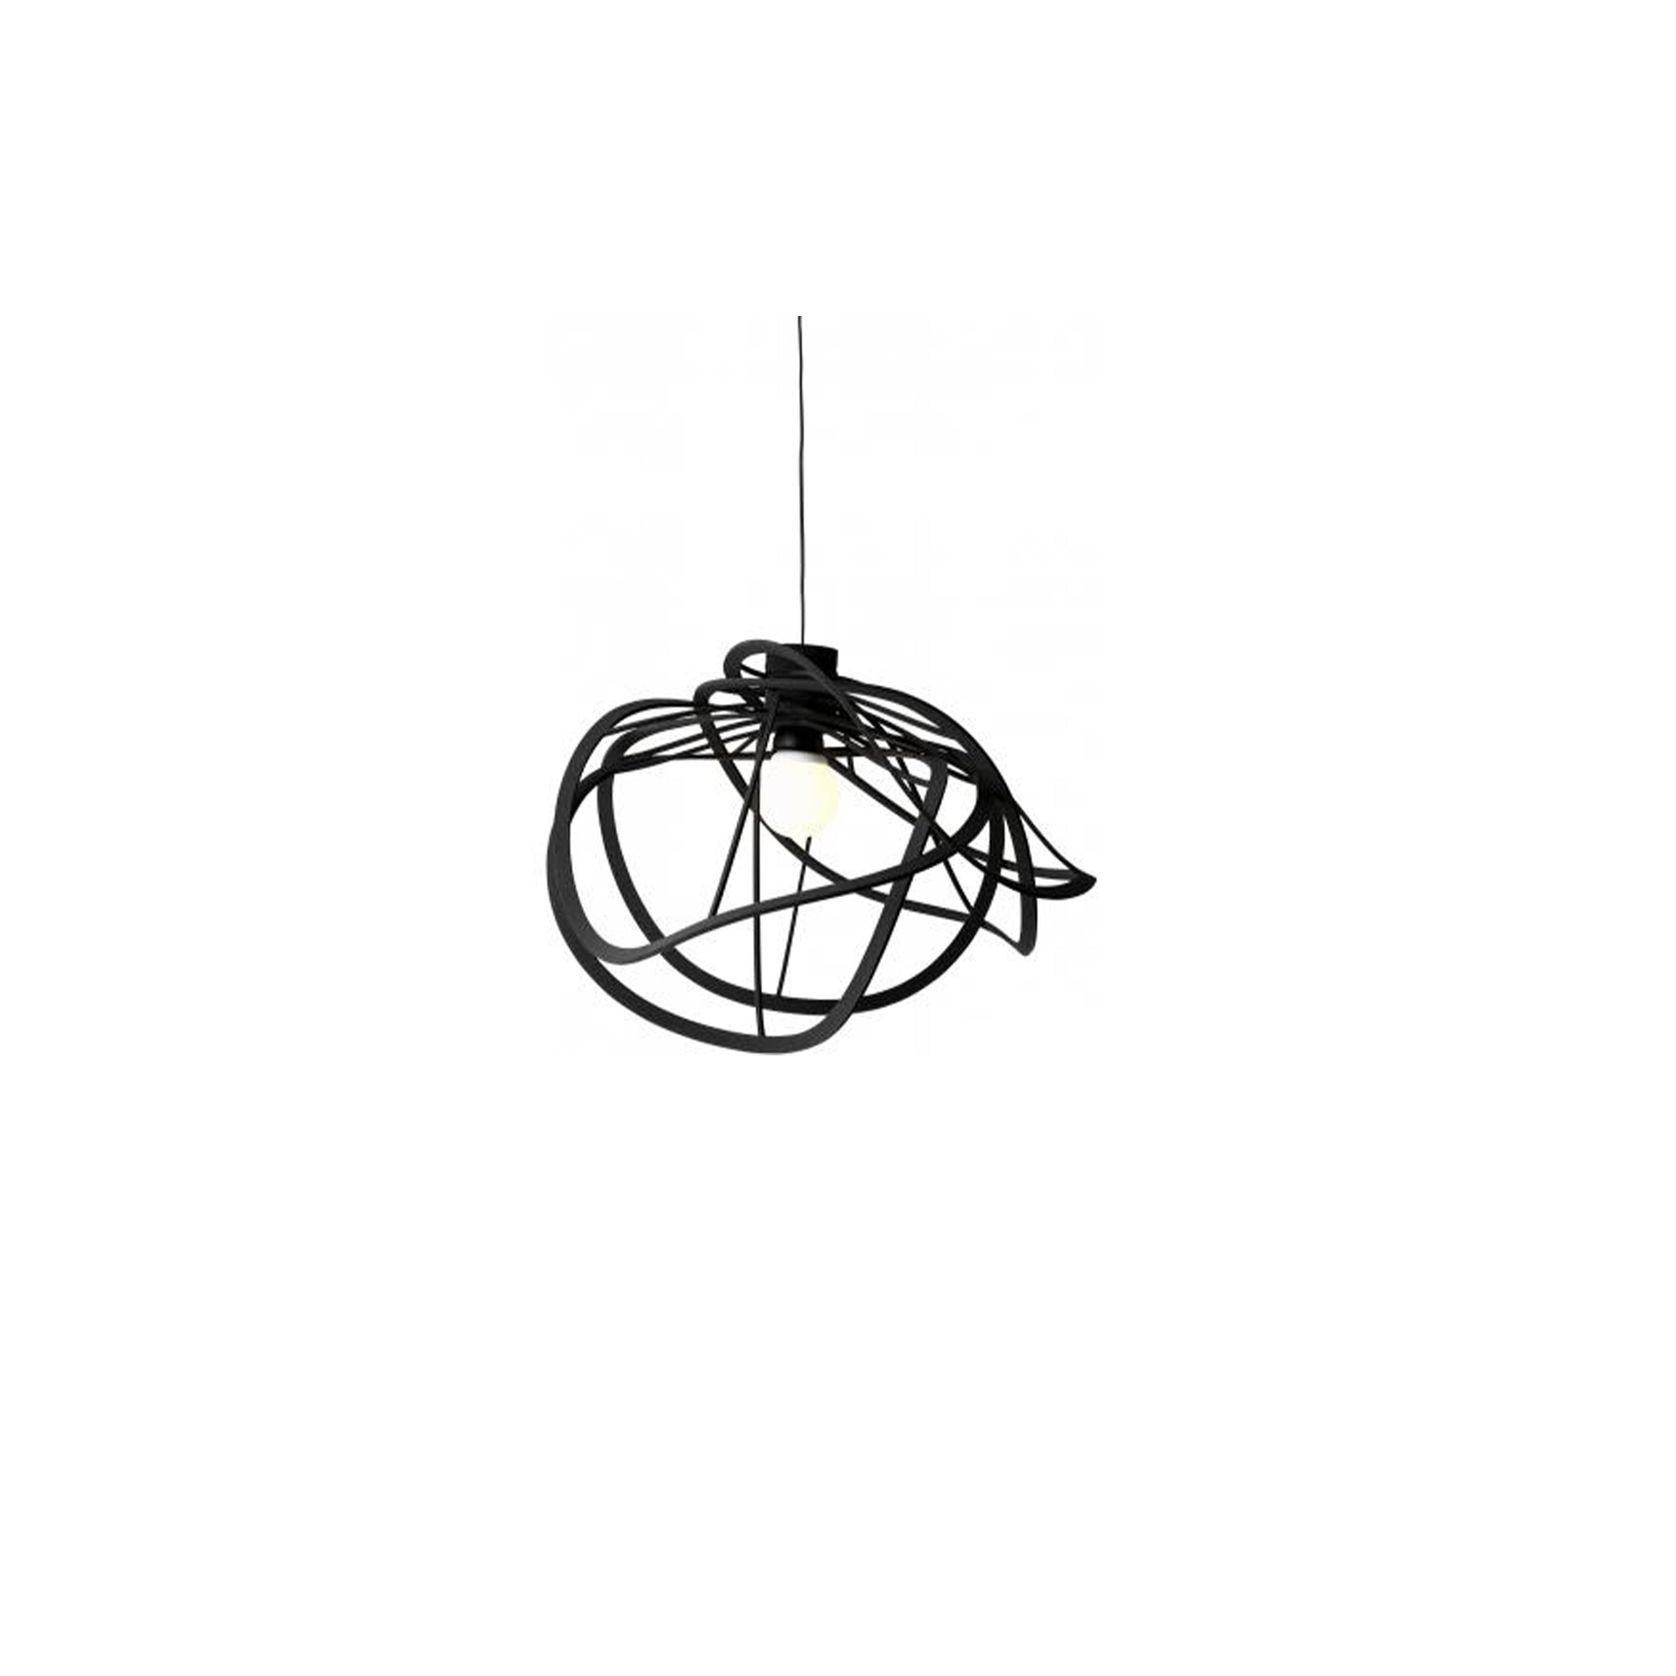 Bloom Suspended Ceiling Light by Hiroshi Kawano | ArchiPro NZ